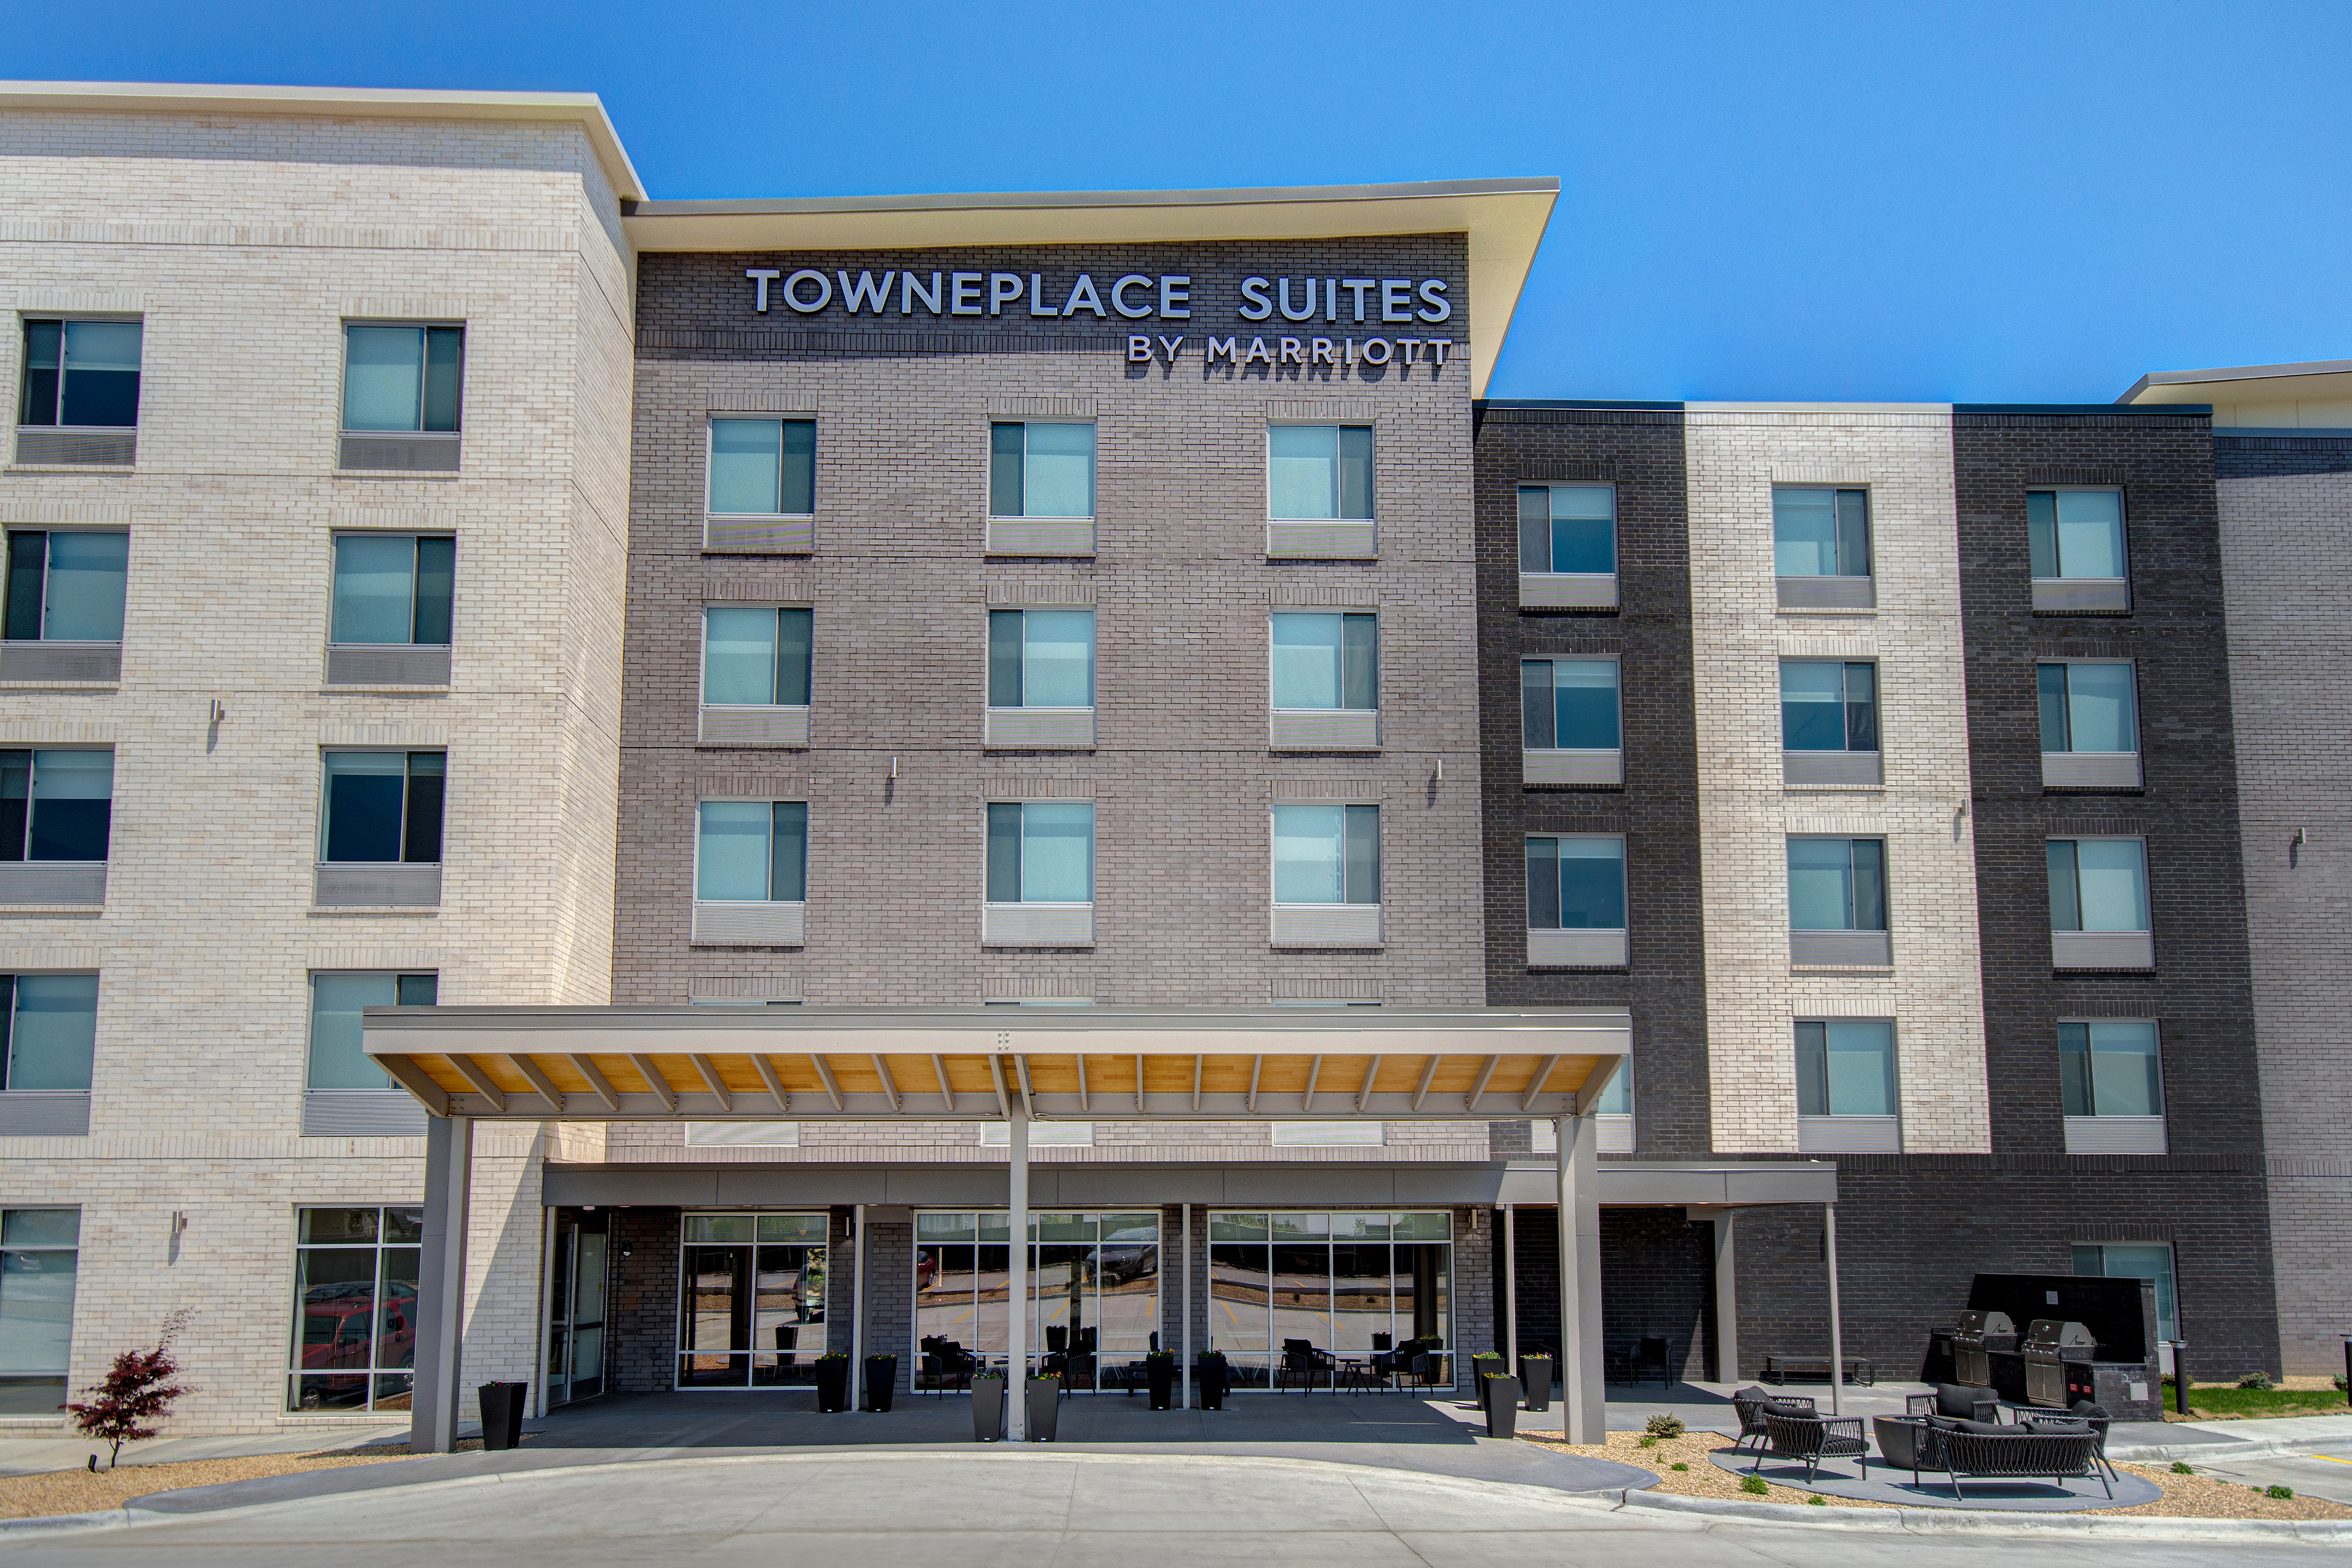 Photo of TownePlace Suites by Marriott Cincinnati Airport South, Florence, KY